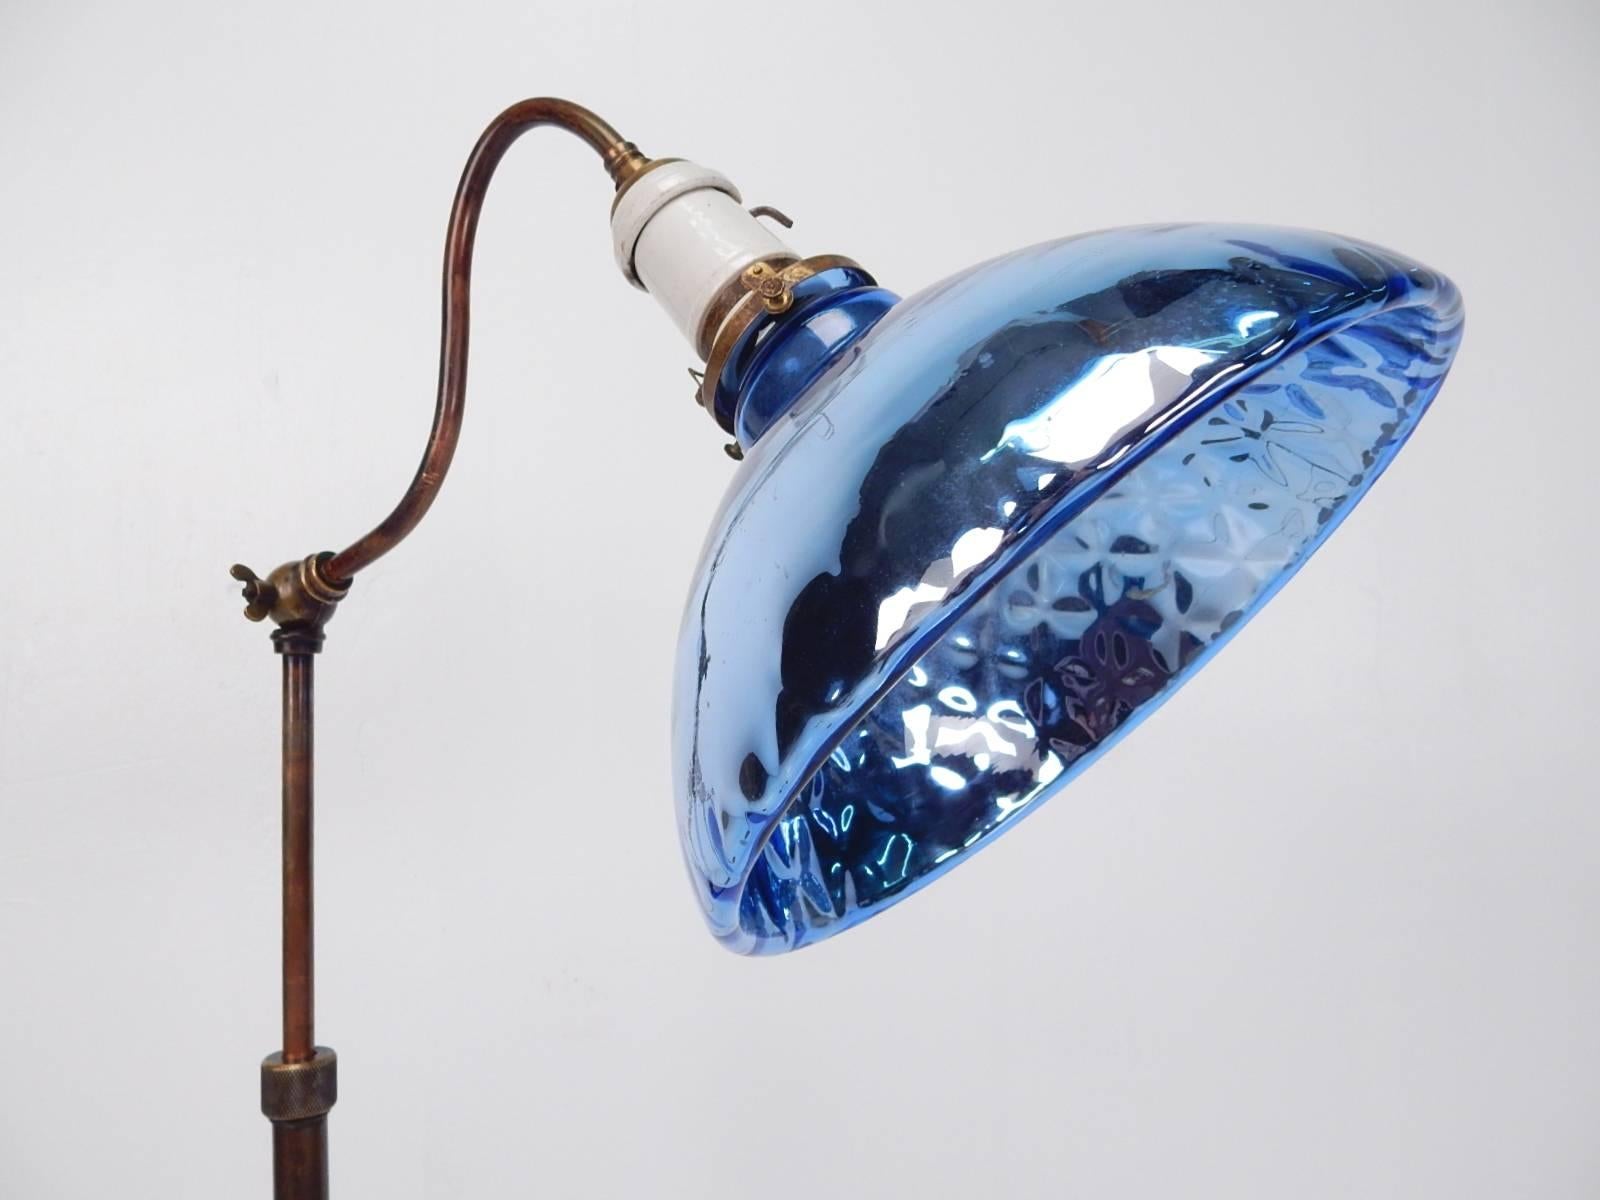 Blue mercury glass shade adjustable floor lamp, circa 1920s.
Porcelain socket, bronze and copper body with weighted lead base.
Raises and lowers via a knurled twist nut from 36 inch tall to 58 inch.
Shade arm adjusts via a wing nut knuckle.
Makes a